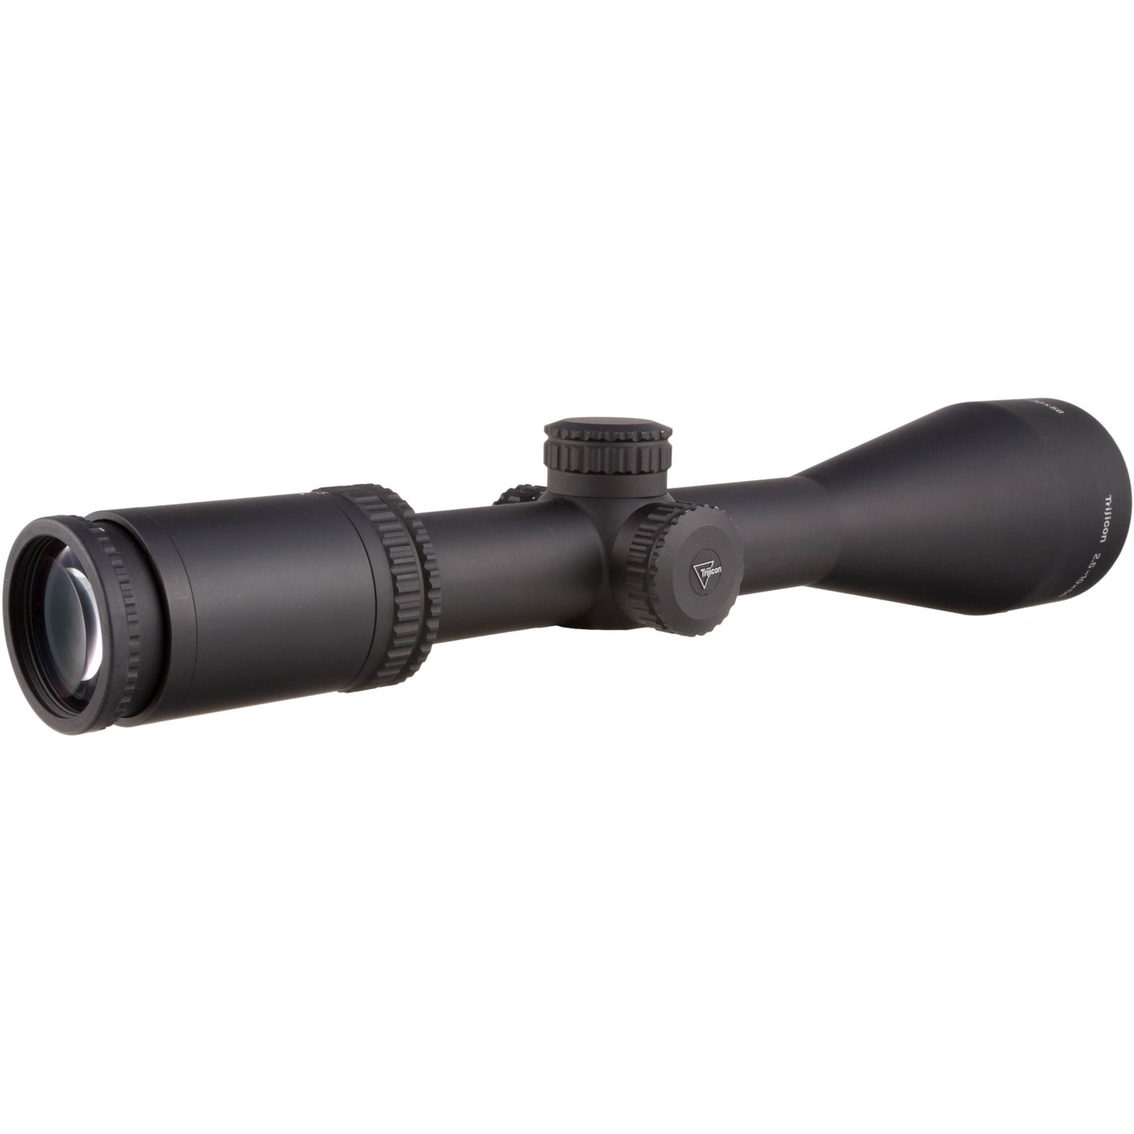 Trijicon Accupower 2.5-10x56 Mil Square Red Riflescope - Image 3 of 4